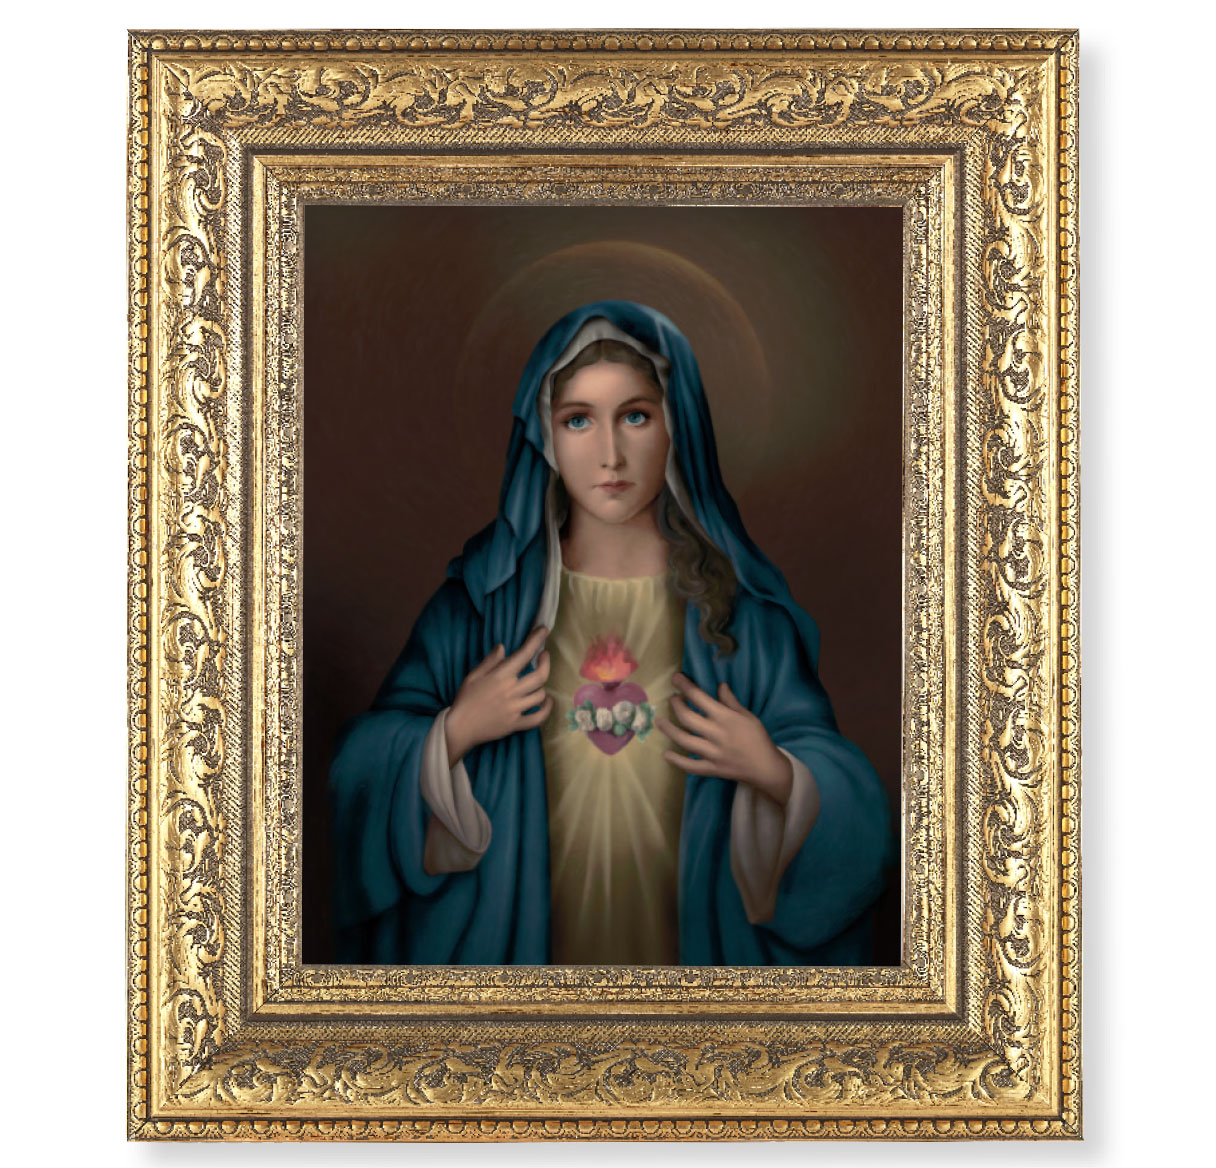 Print Immaculate Heart of Mary 8 x 10 inch Gold Framed